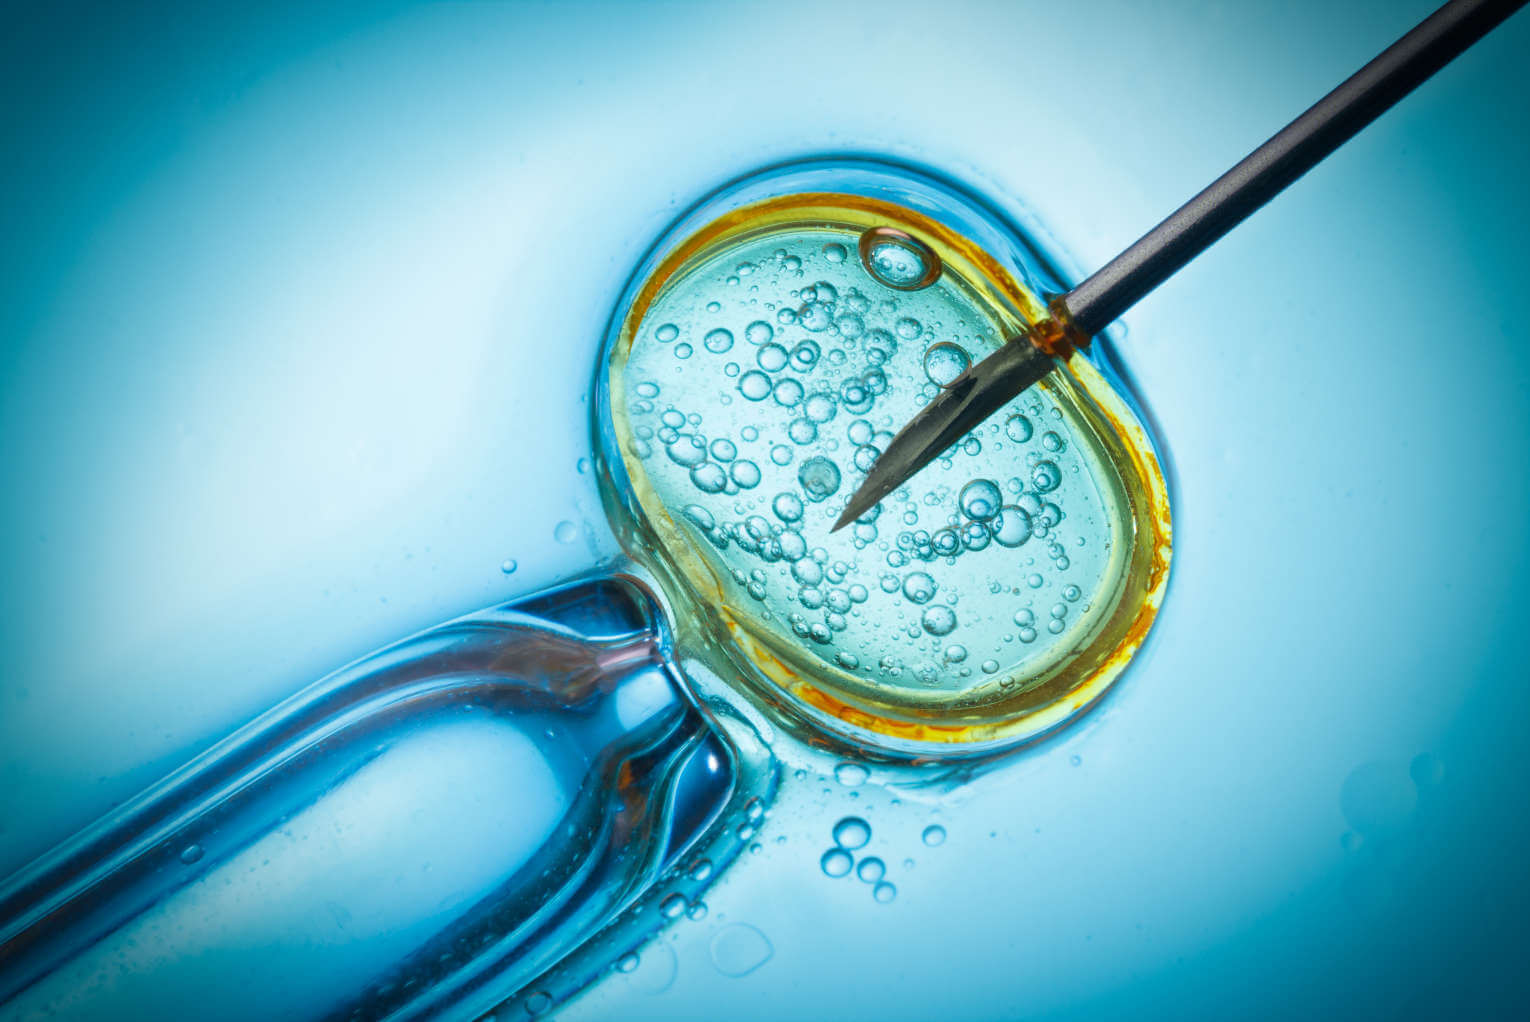 Southern Baptists Vote to Oppose IVF Procedures